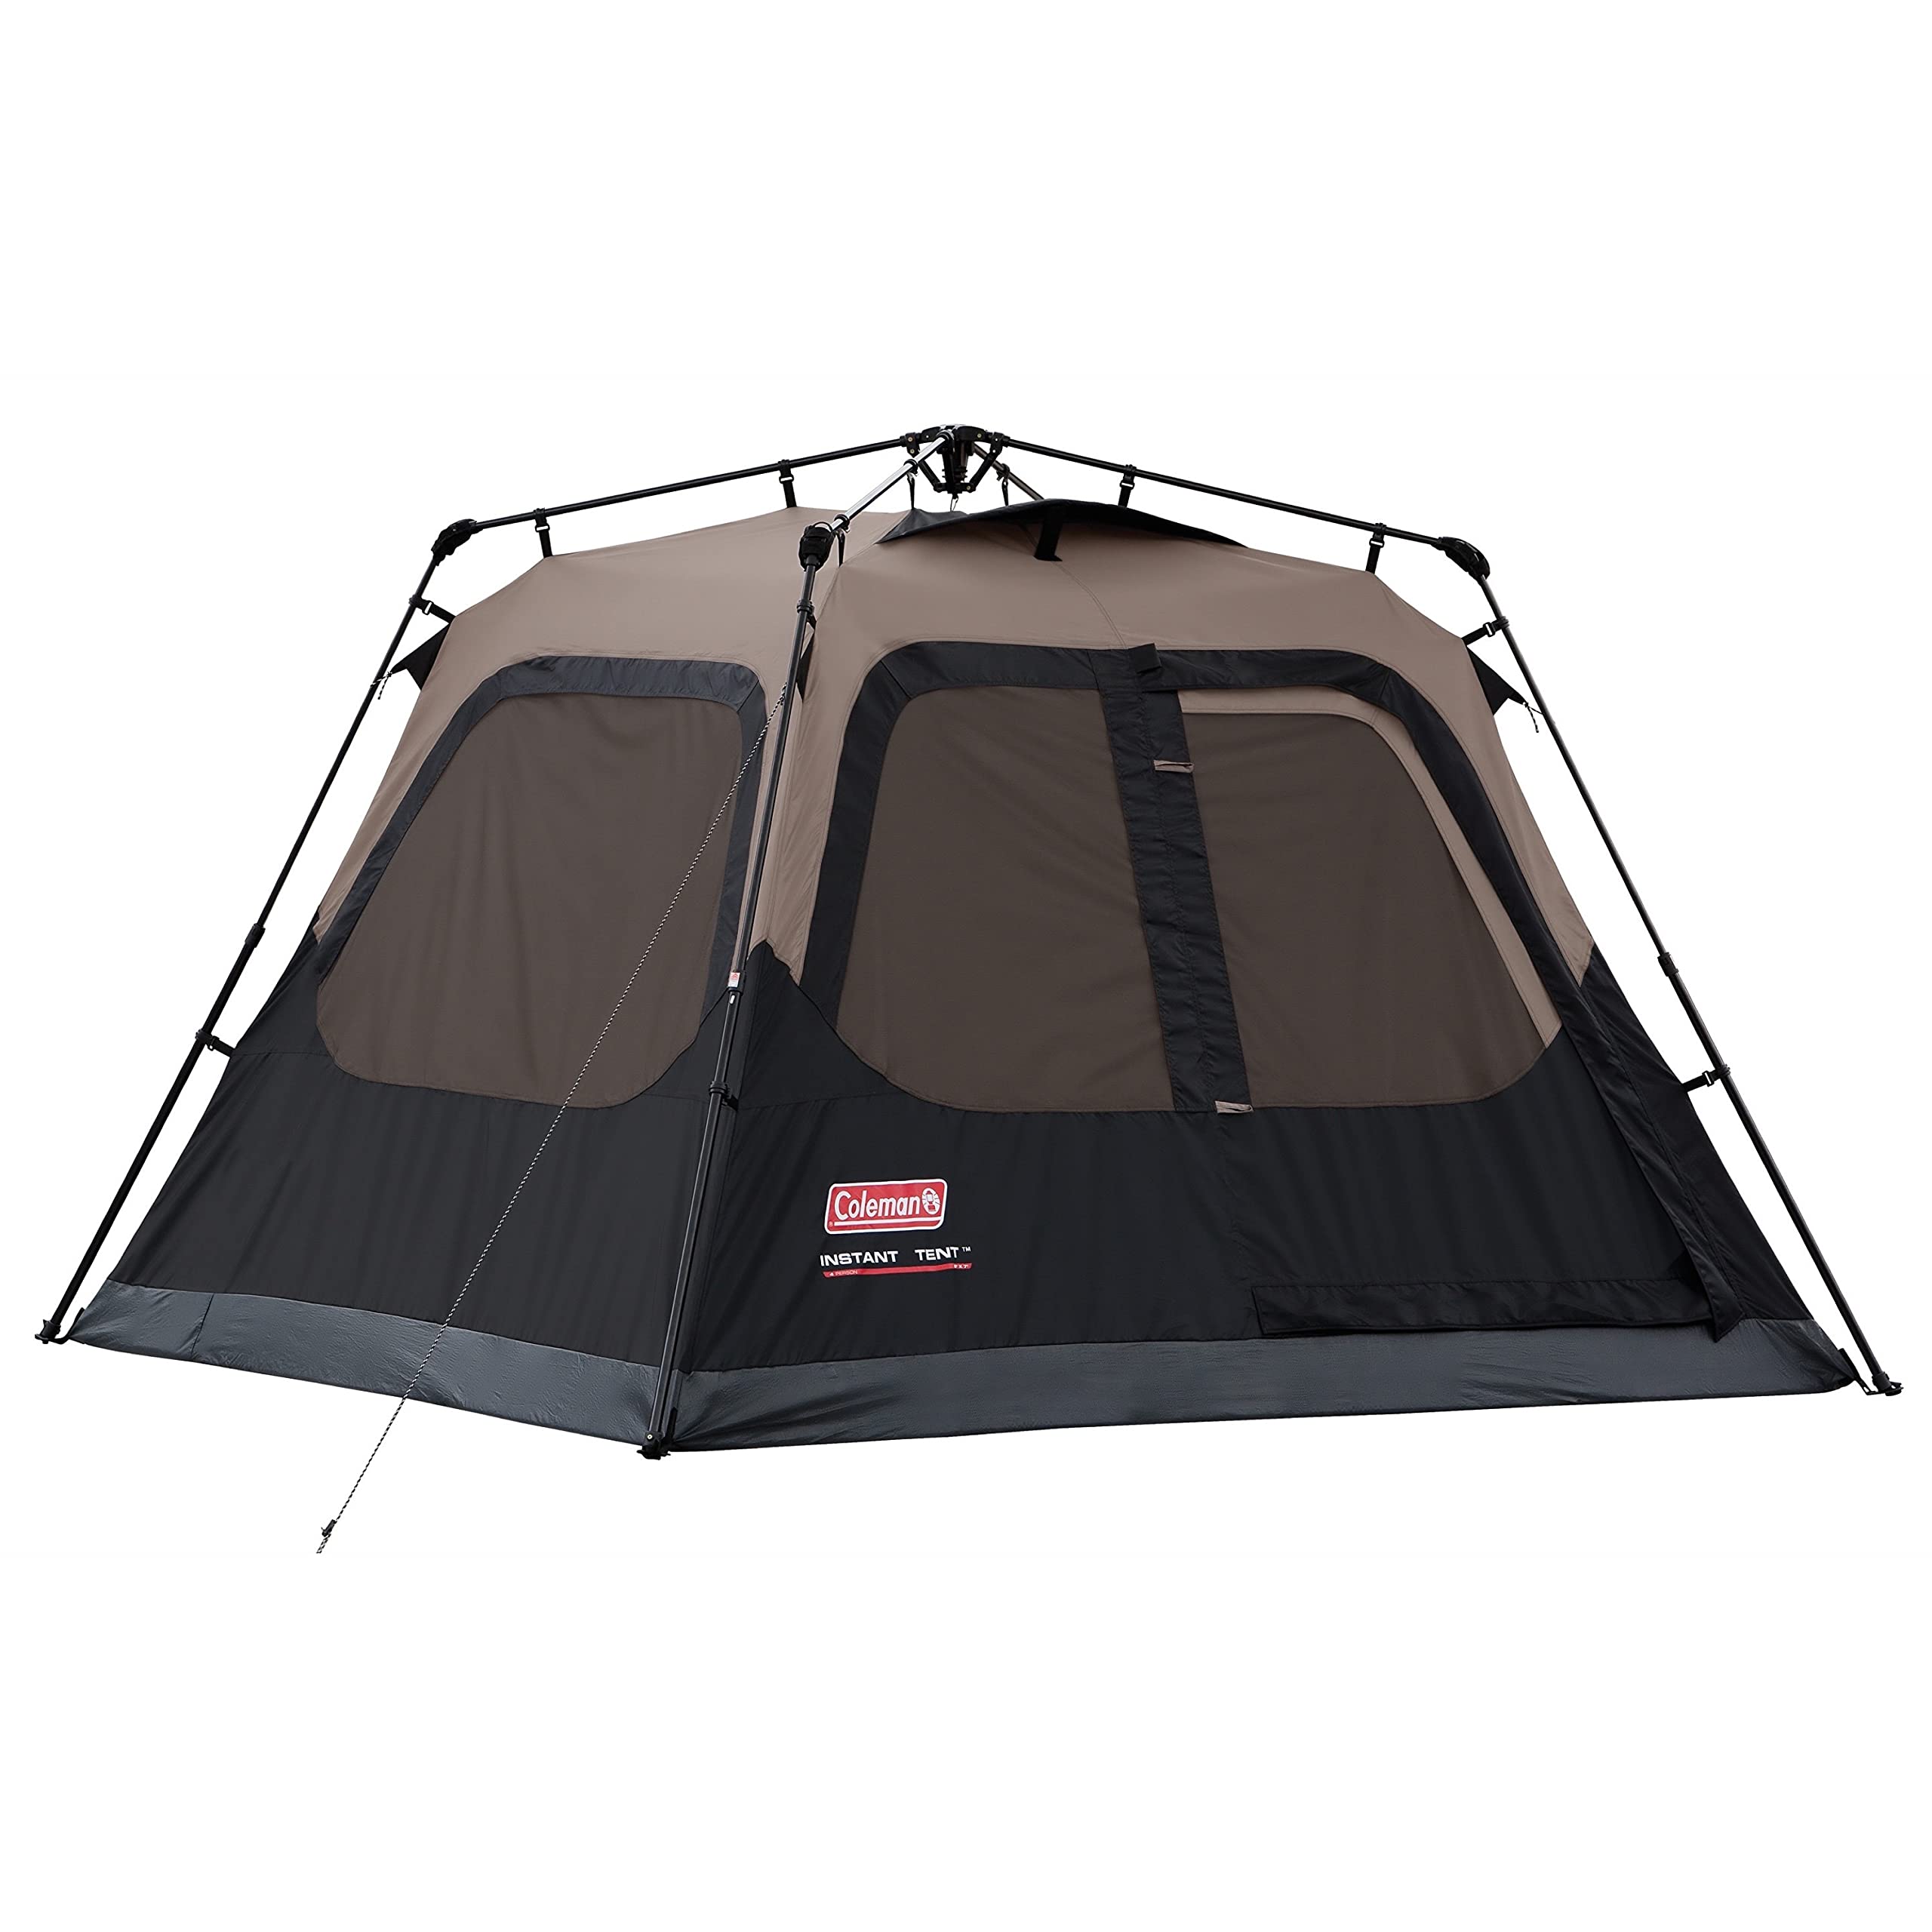 <a href="https://www.amazon.com/dp/B004E4AVY8?%3Fth=1&psc=1&tag=thecampfire0d-20">Coleman Instant Cabin</a>